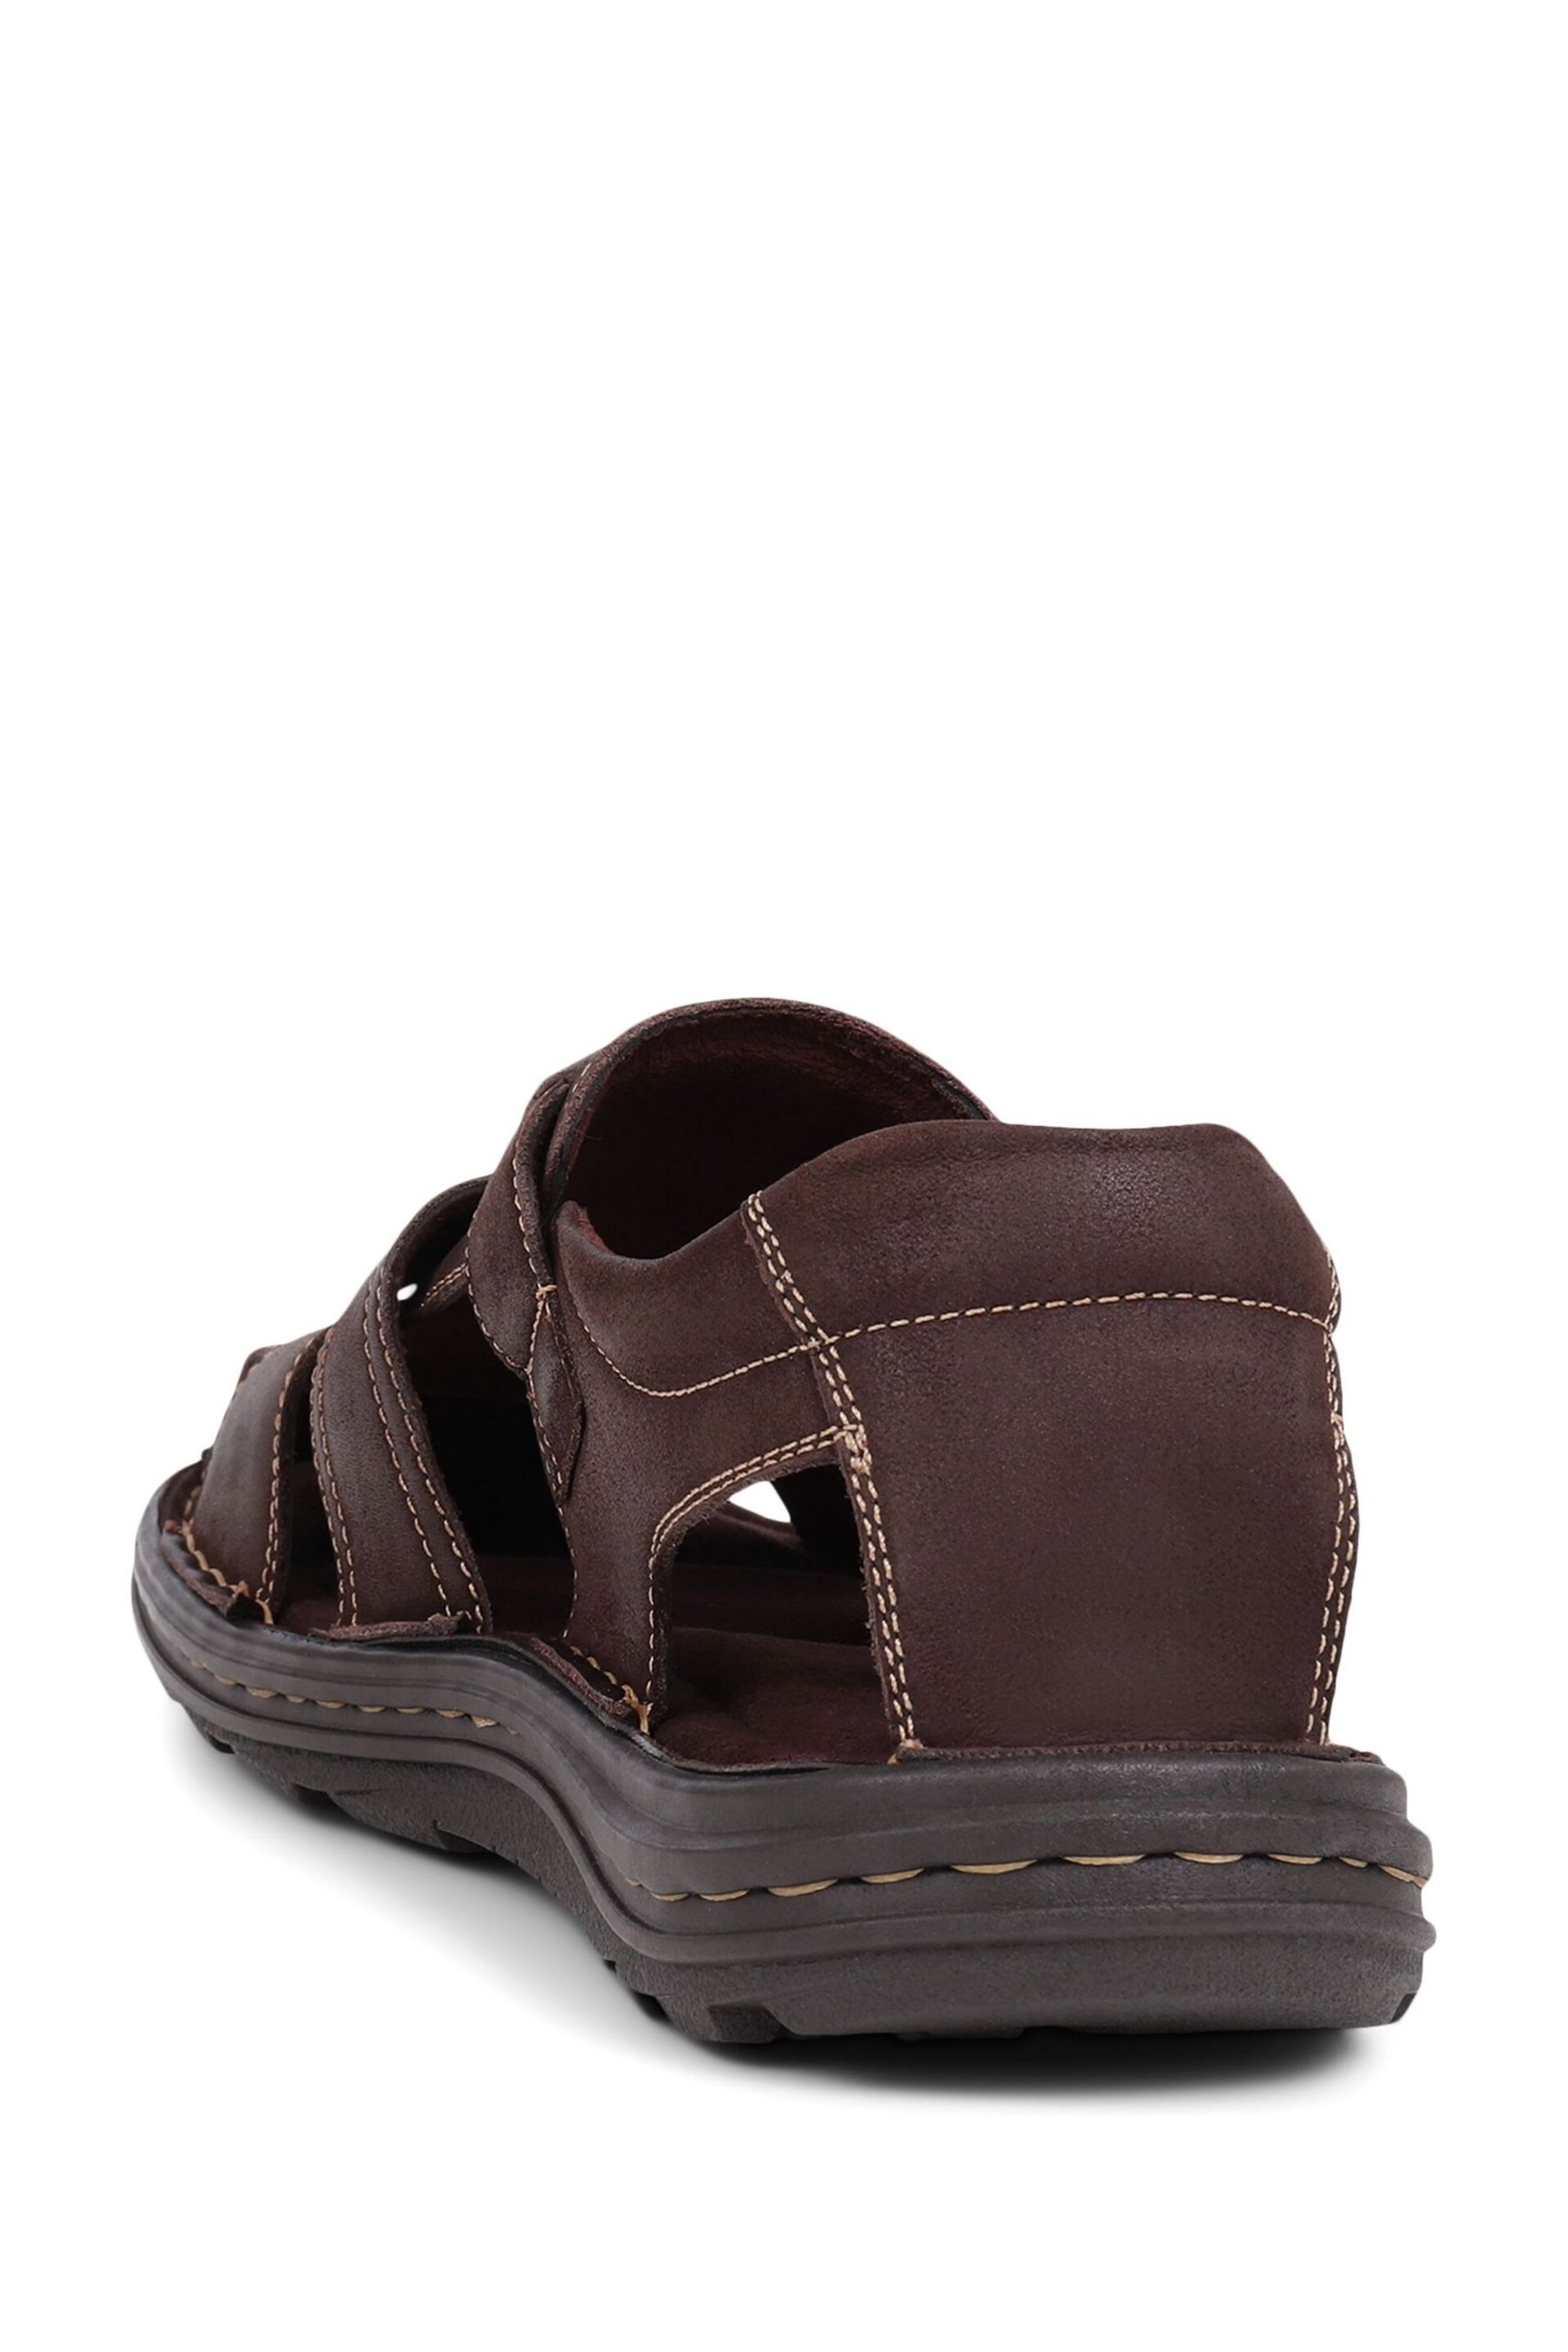 Pavers Touch-Fasten Leather Brown Sandals - Image 3 of 5